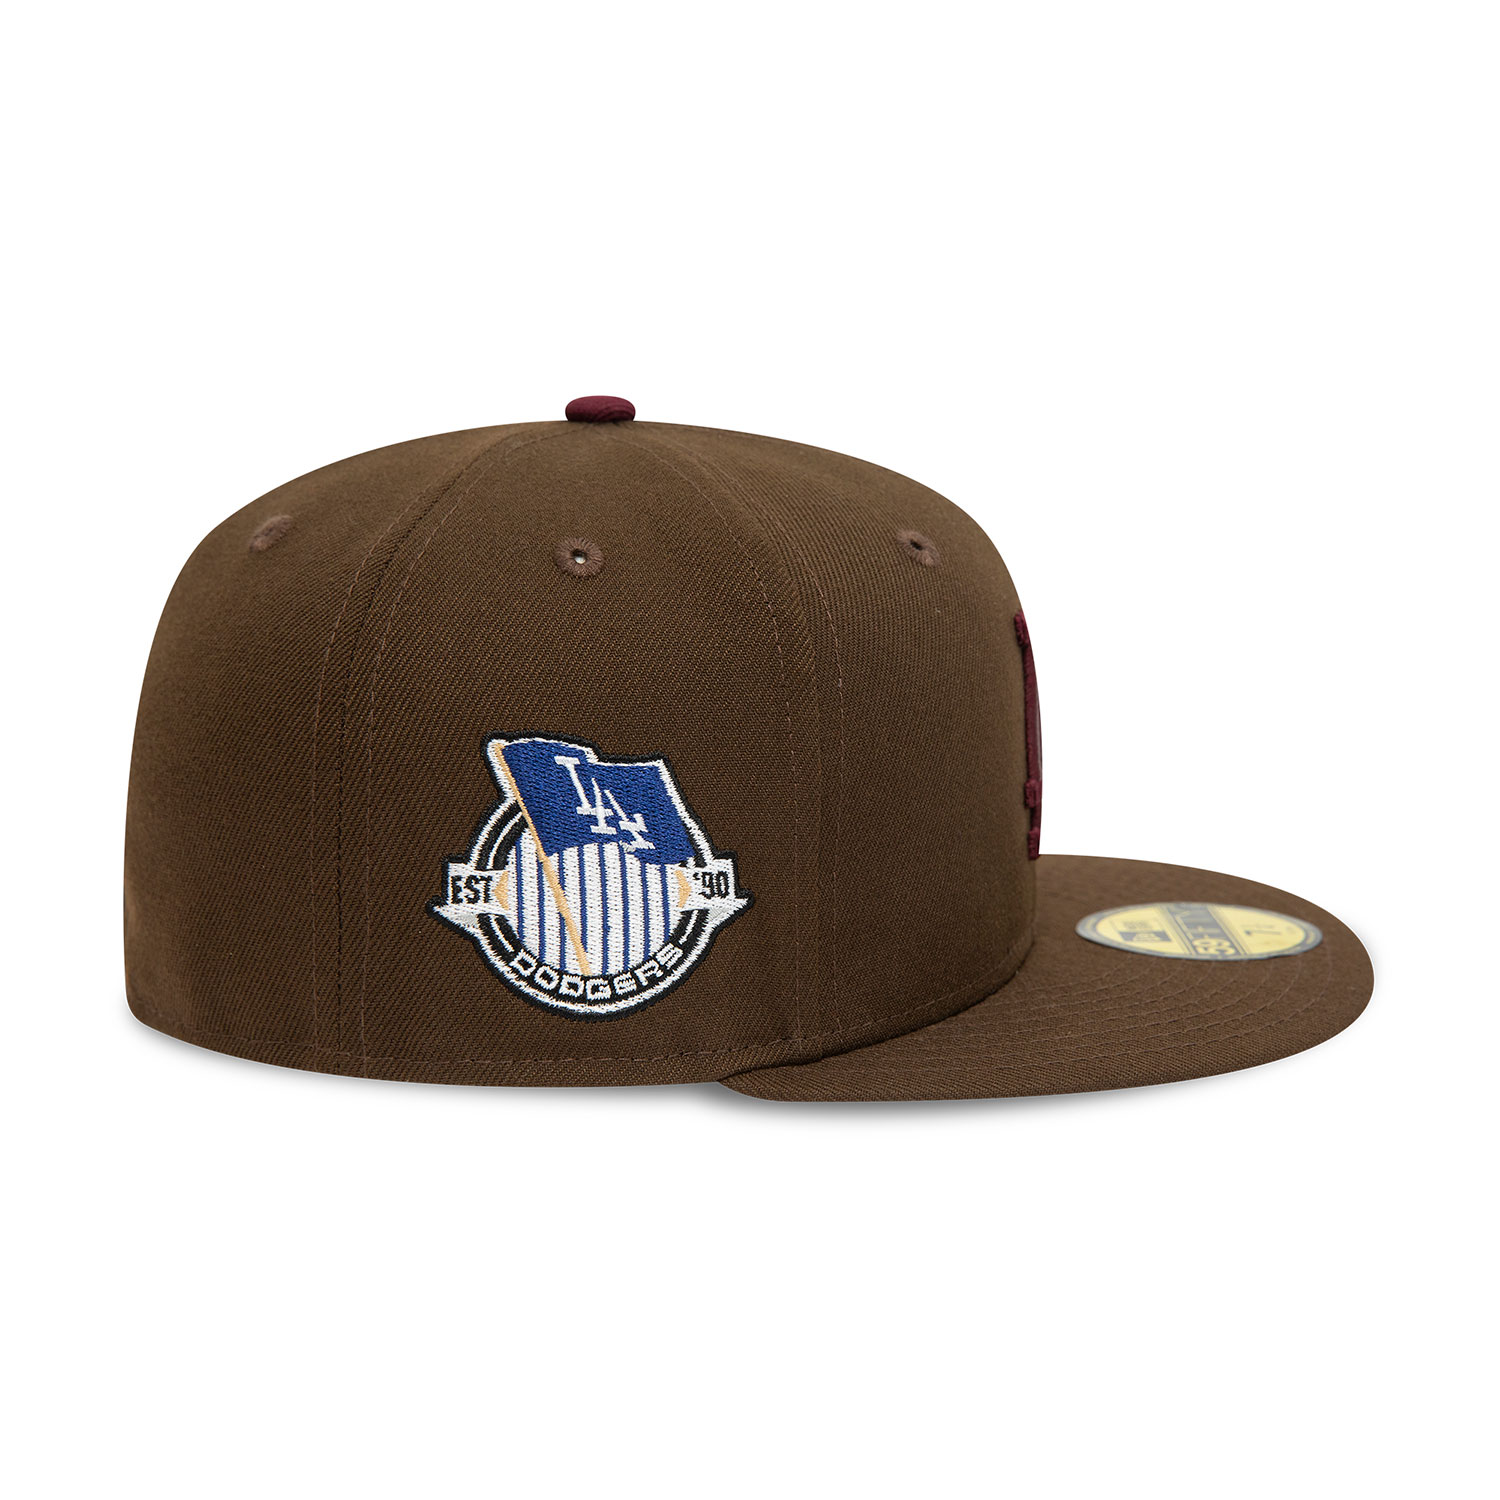 Official New Era Mlb Fall La Dodgers Dark Brown 59fifty Fitted Cap